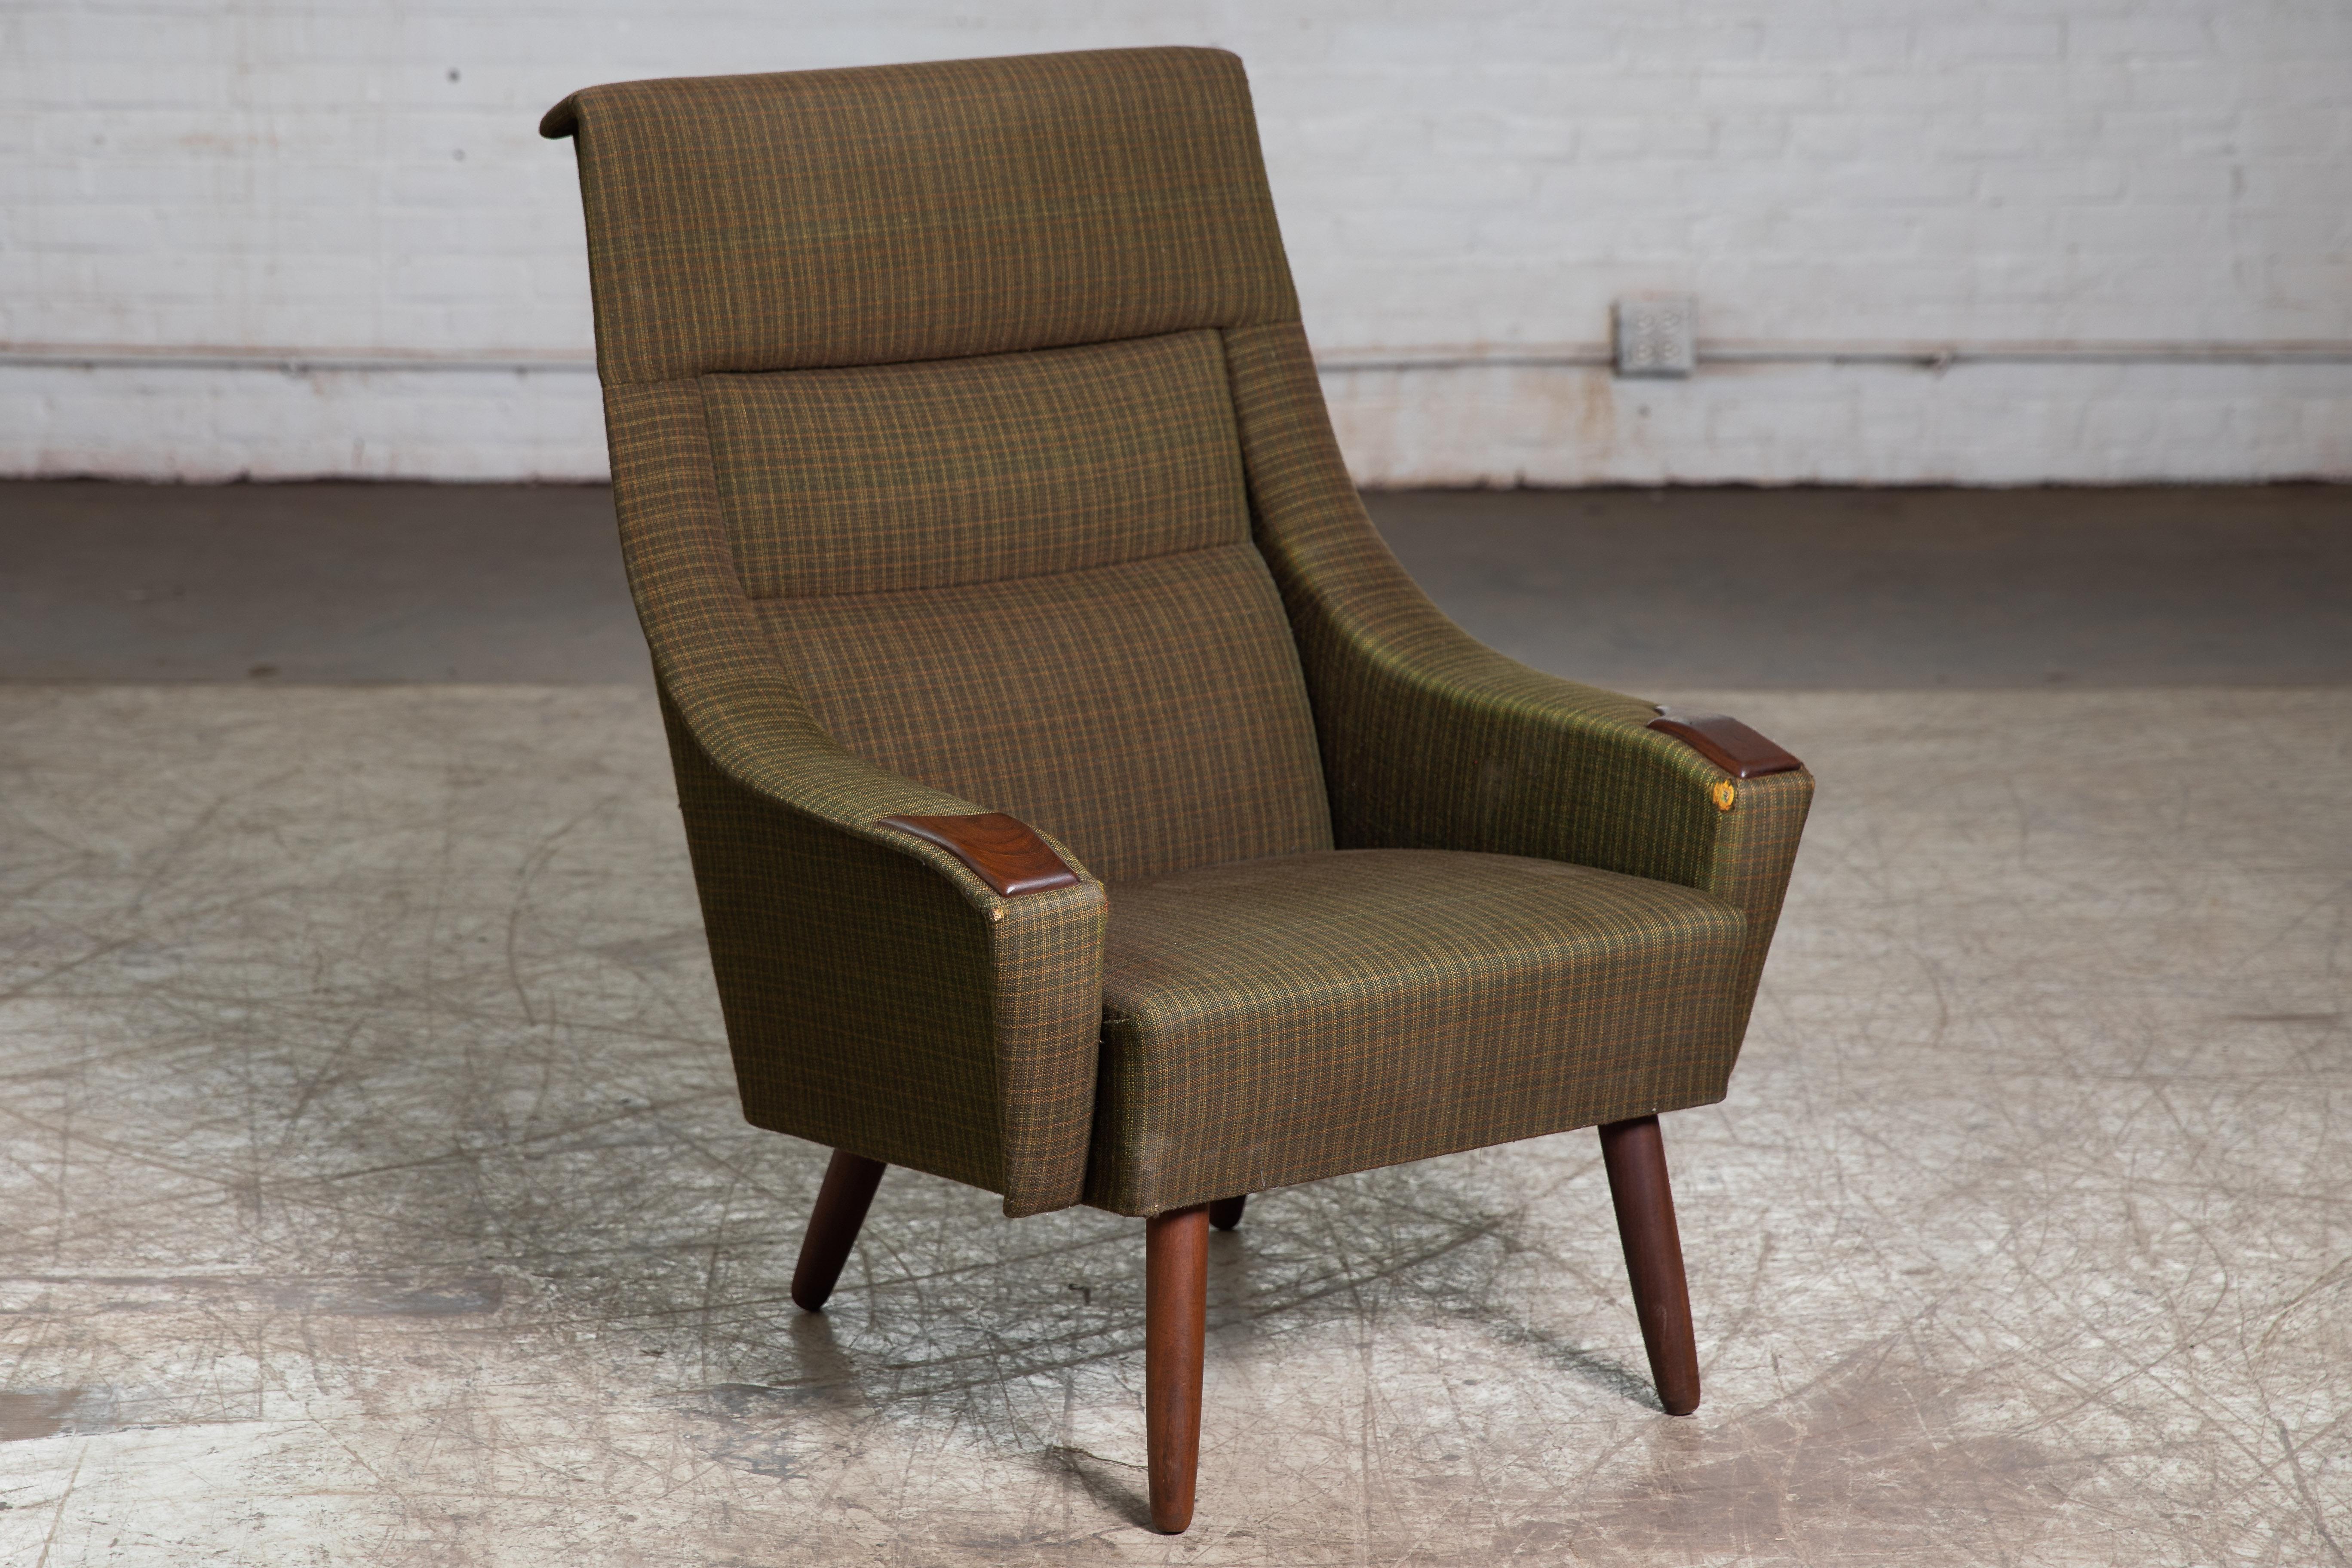 Beautiful Late 1950's or early 1960's classic danish modern lounge chairs boasting wood tipped arm rests, tapered teak legs, and a lovely olive green wool upholstery. The angled back rest and thick padded seating offer maximum comfort. A sleek and